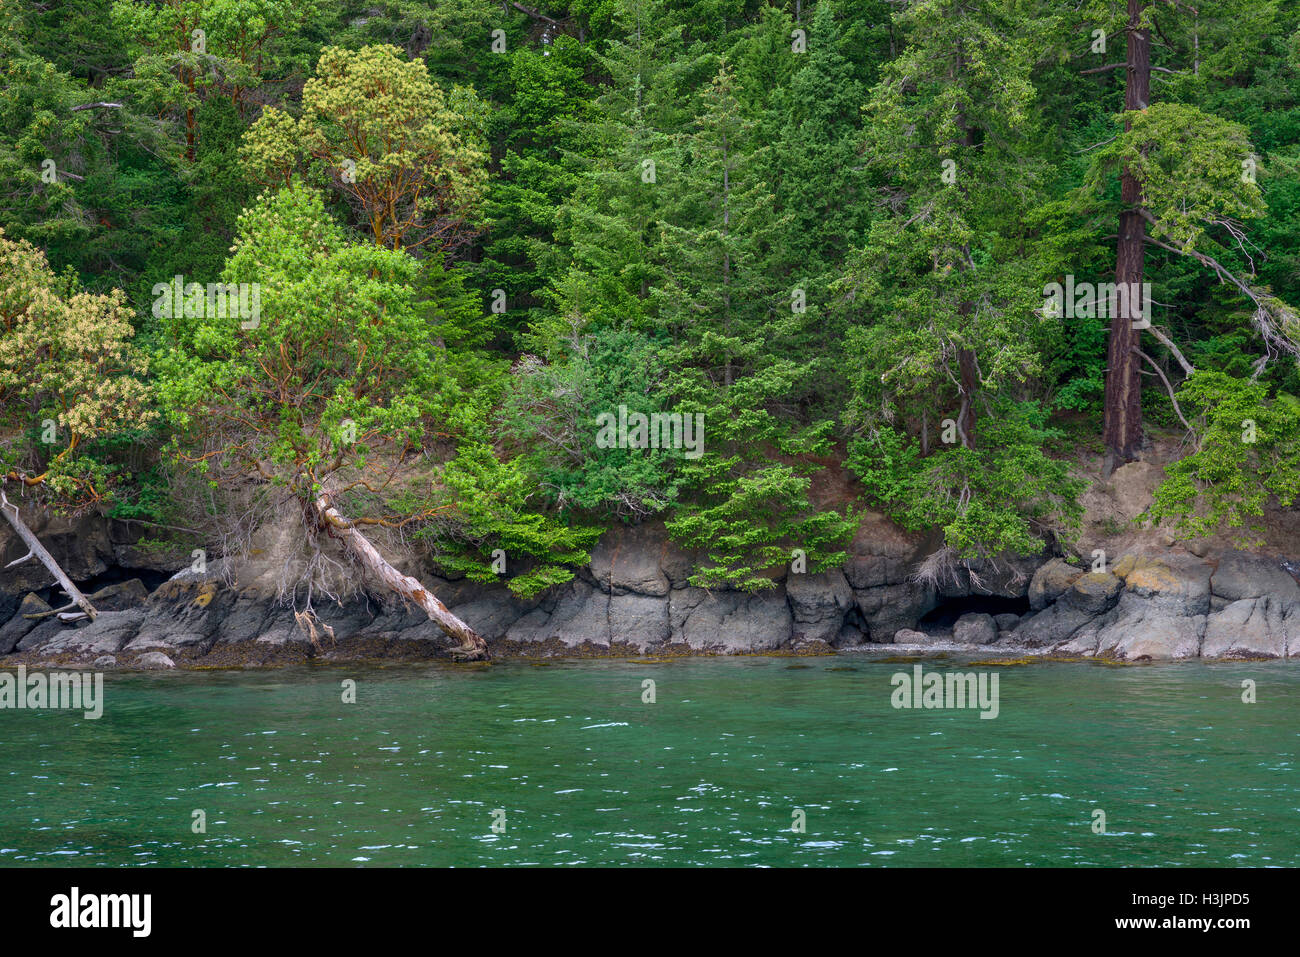 USA, Washington, San Juan Islands, Orcas Island, Forest of Douglas fir and Pacific madrone above rocky shoreline at West Beach. Stock Photo